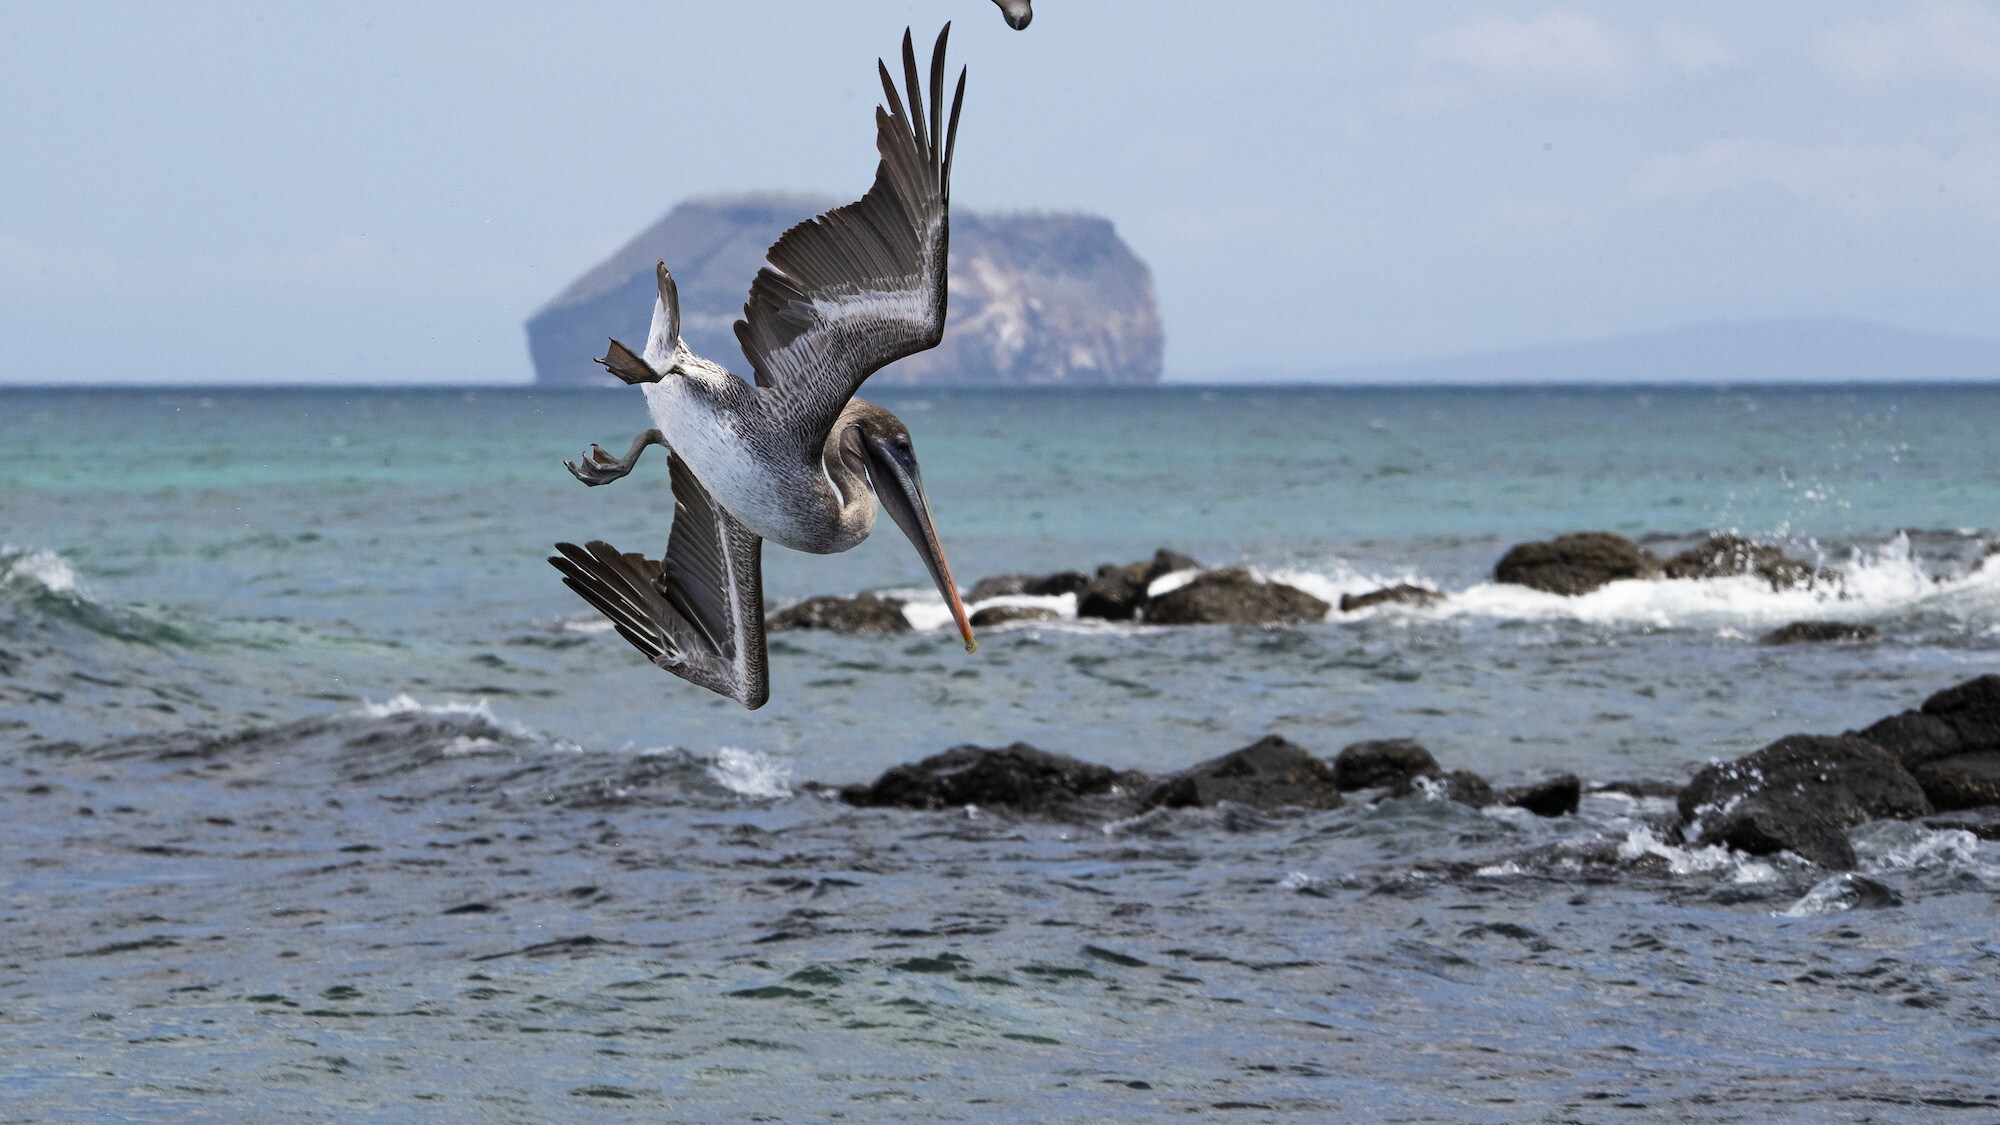 Brown Pelican preparing to dive into the ocean. (National Geographic for Disney+/James Brickell)